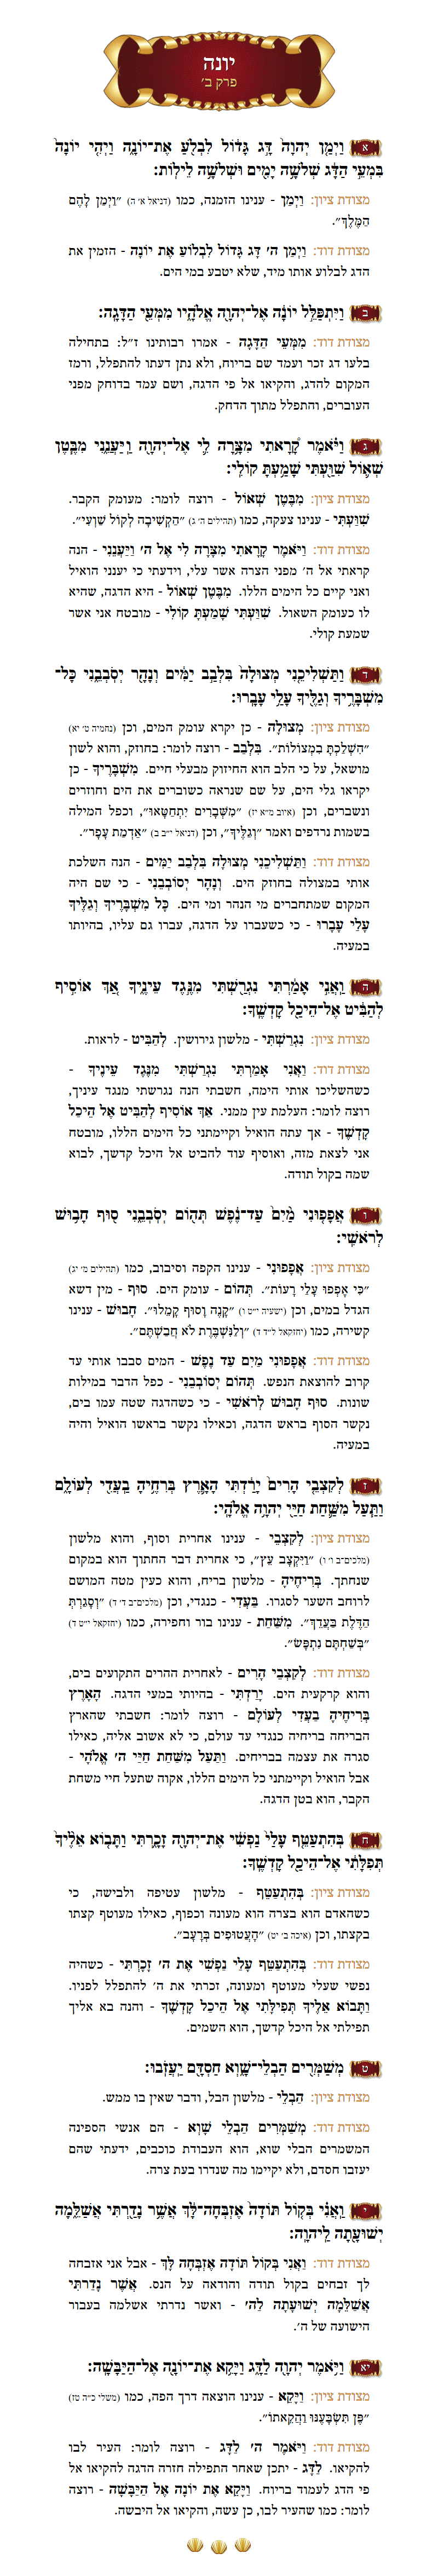 Sefer Yonah Chapter 2 with commentary